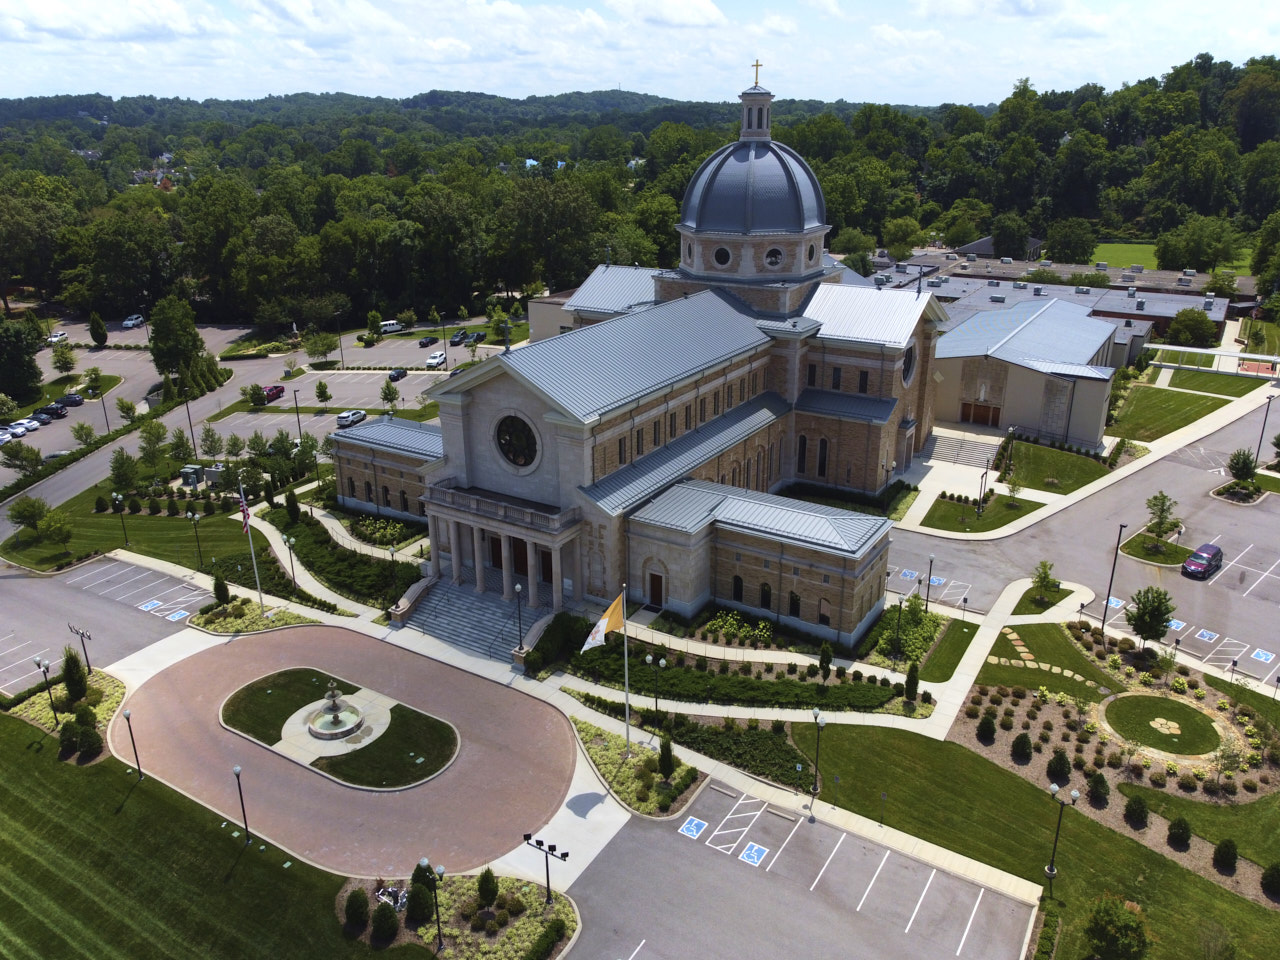 The Cathedral of the Most Sacred Heart of Jesus is a cathedral and parish church located in Knoxville, Tennessee, United States. It is the seat of the Catholic Diocese of Knoxville. The original cathedral church was completed in 1956 and the present church was completed in 2018.